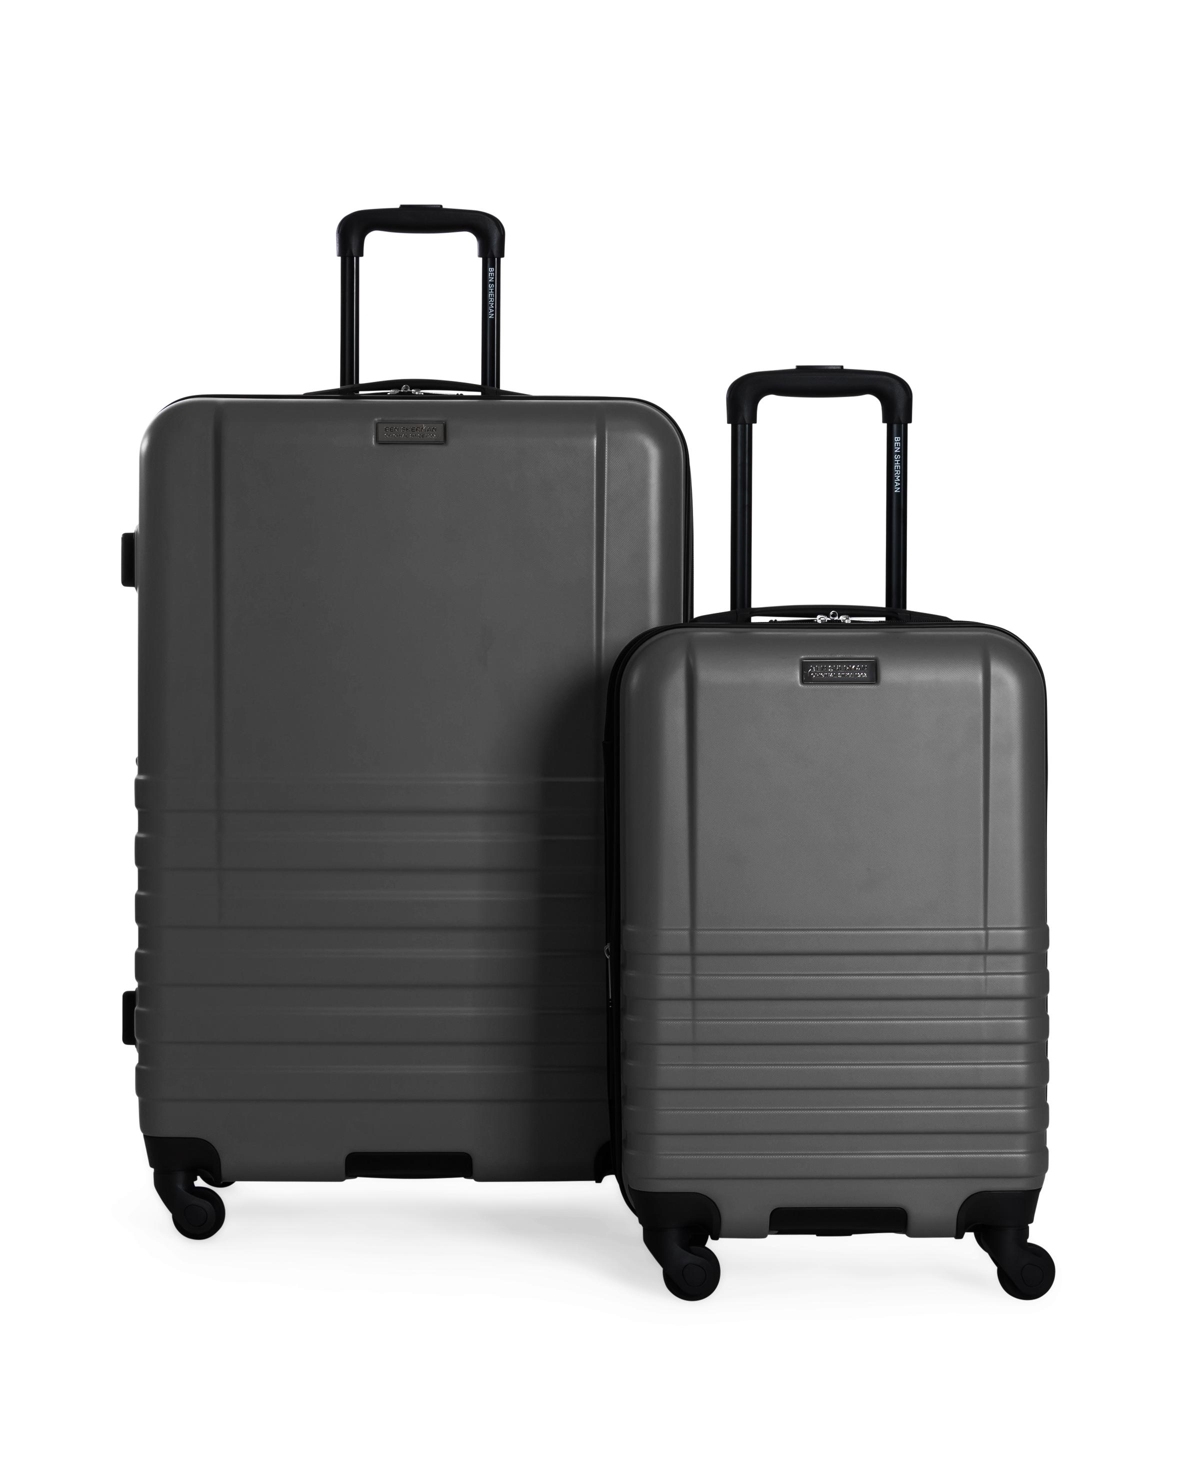 Hereford 2-Piece Lightweight Hardside Expandable Spinner Luggage Set - Gray